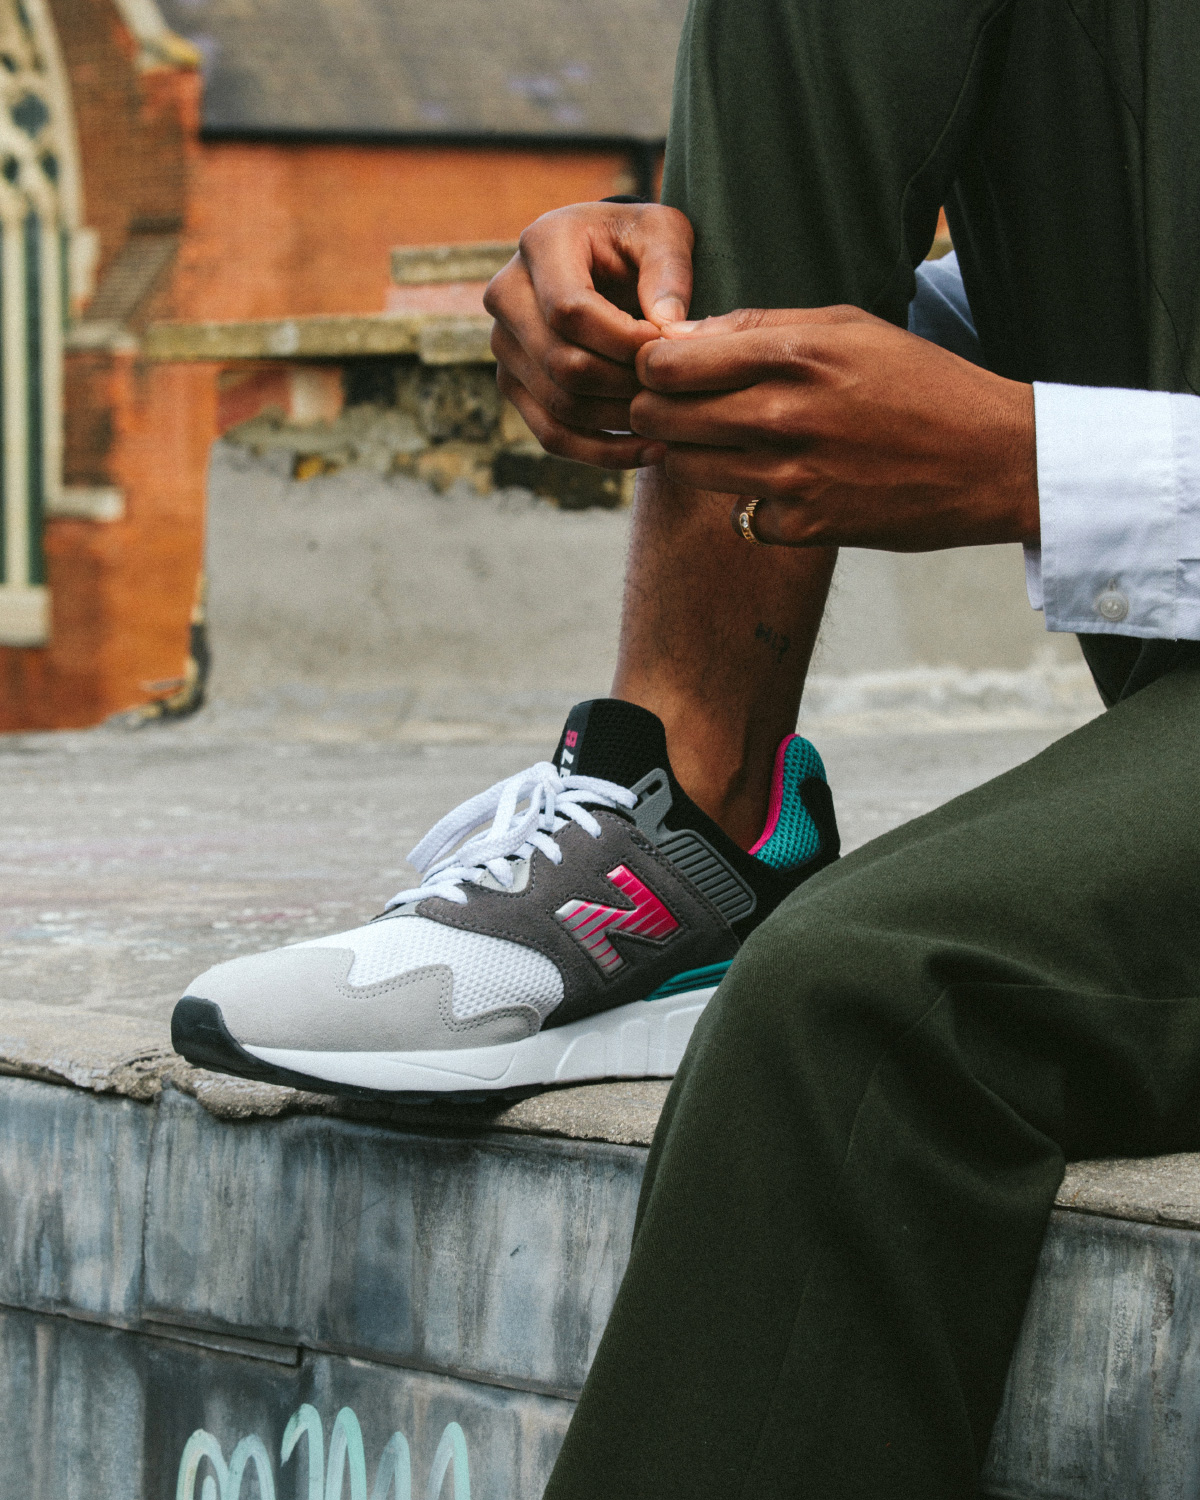 Everything You Need to Know about the New Balance 997 Sport